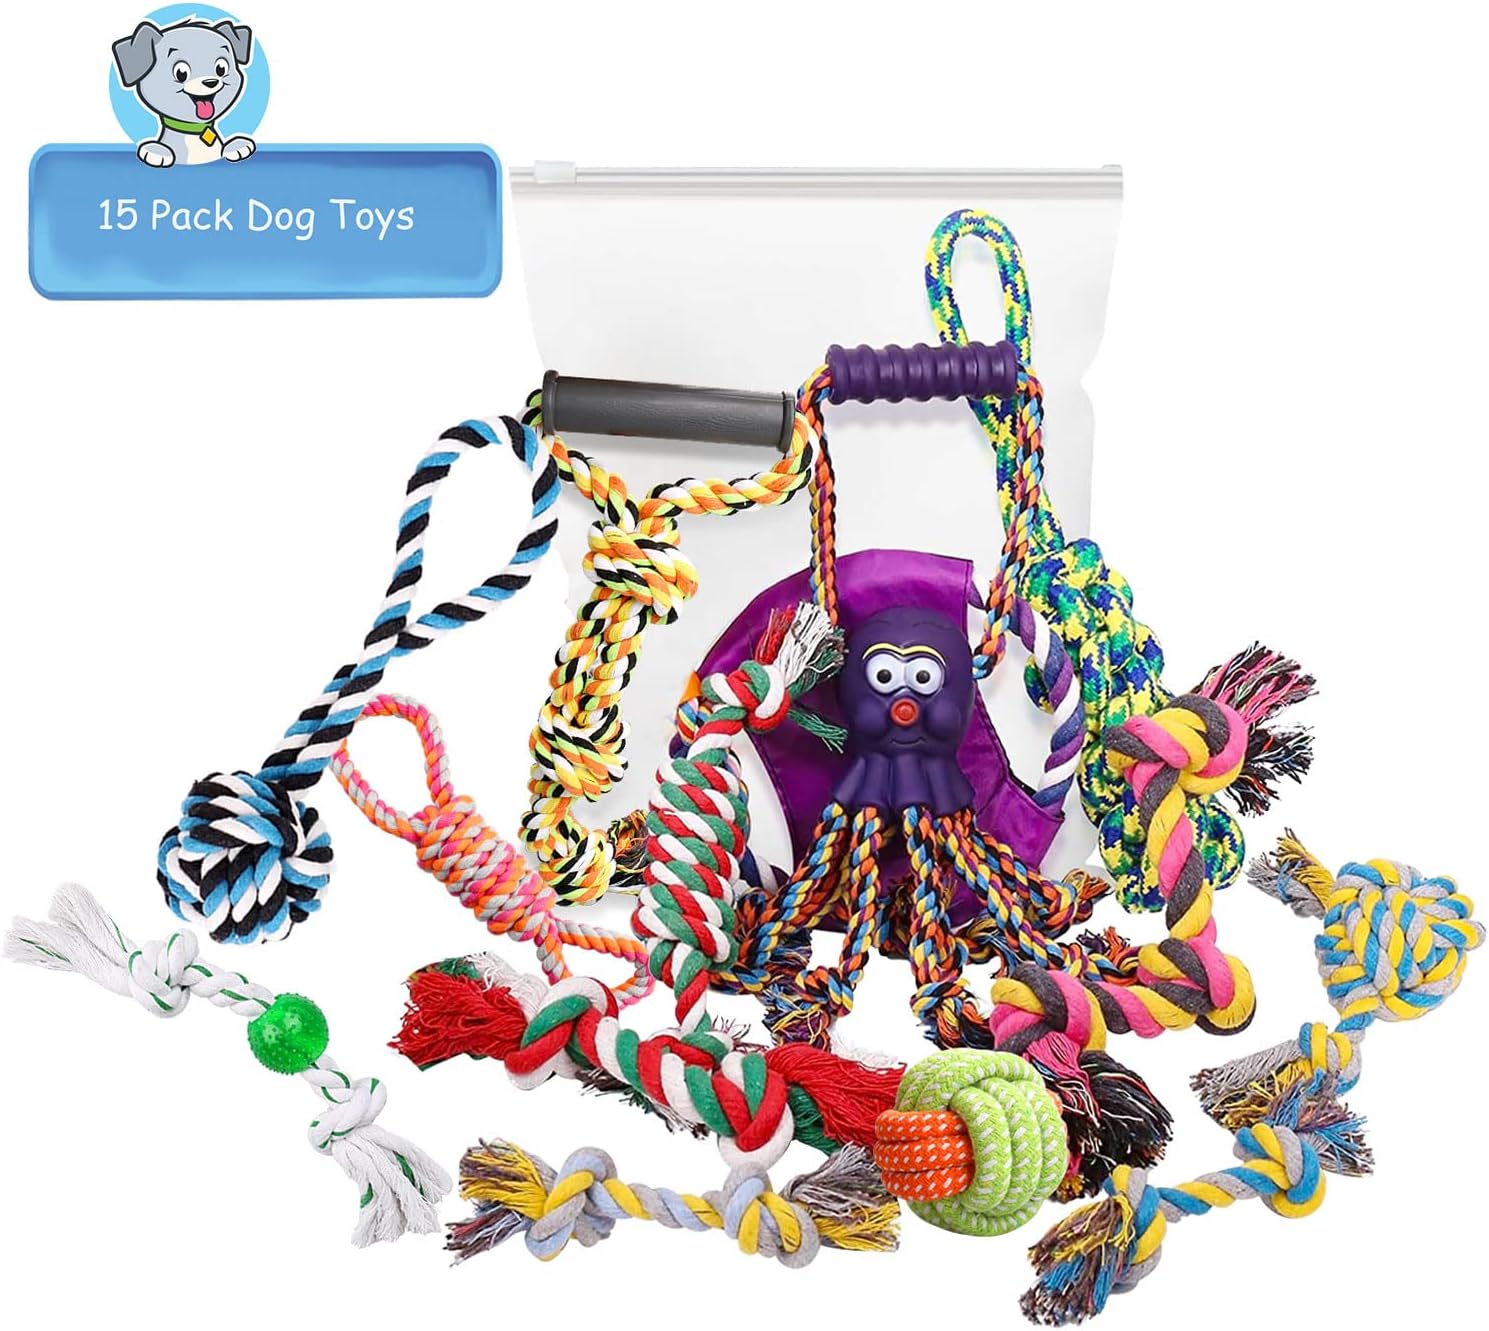 UPSKY Dog Rope Toys Dog Grinding Teeth 2 Nearly Indestructible Dog Toys, Rope Toy for Large Dogs, Dental Cleaning Chew Toys, Dog Tug Toy for Boredom, Dog Rope Toy for Aggressive Chewers (2 Packs)